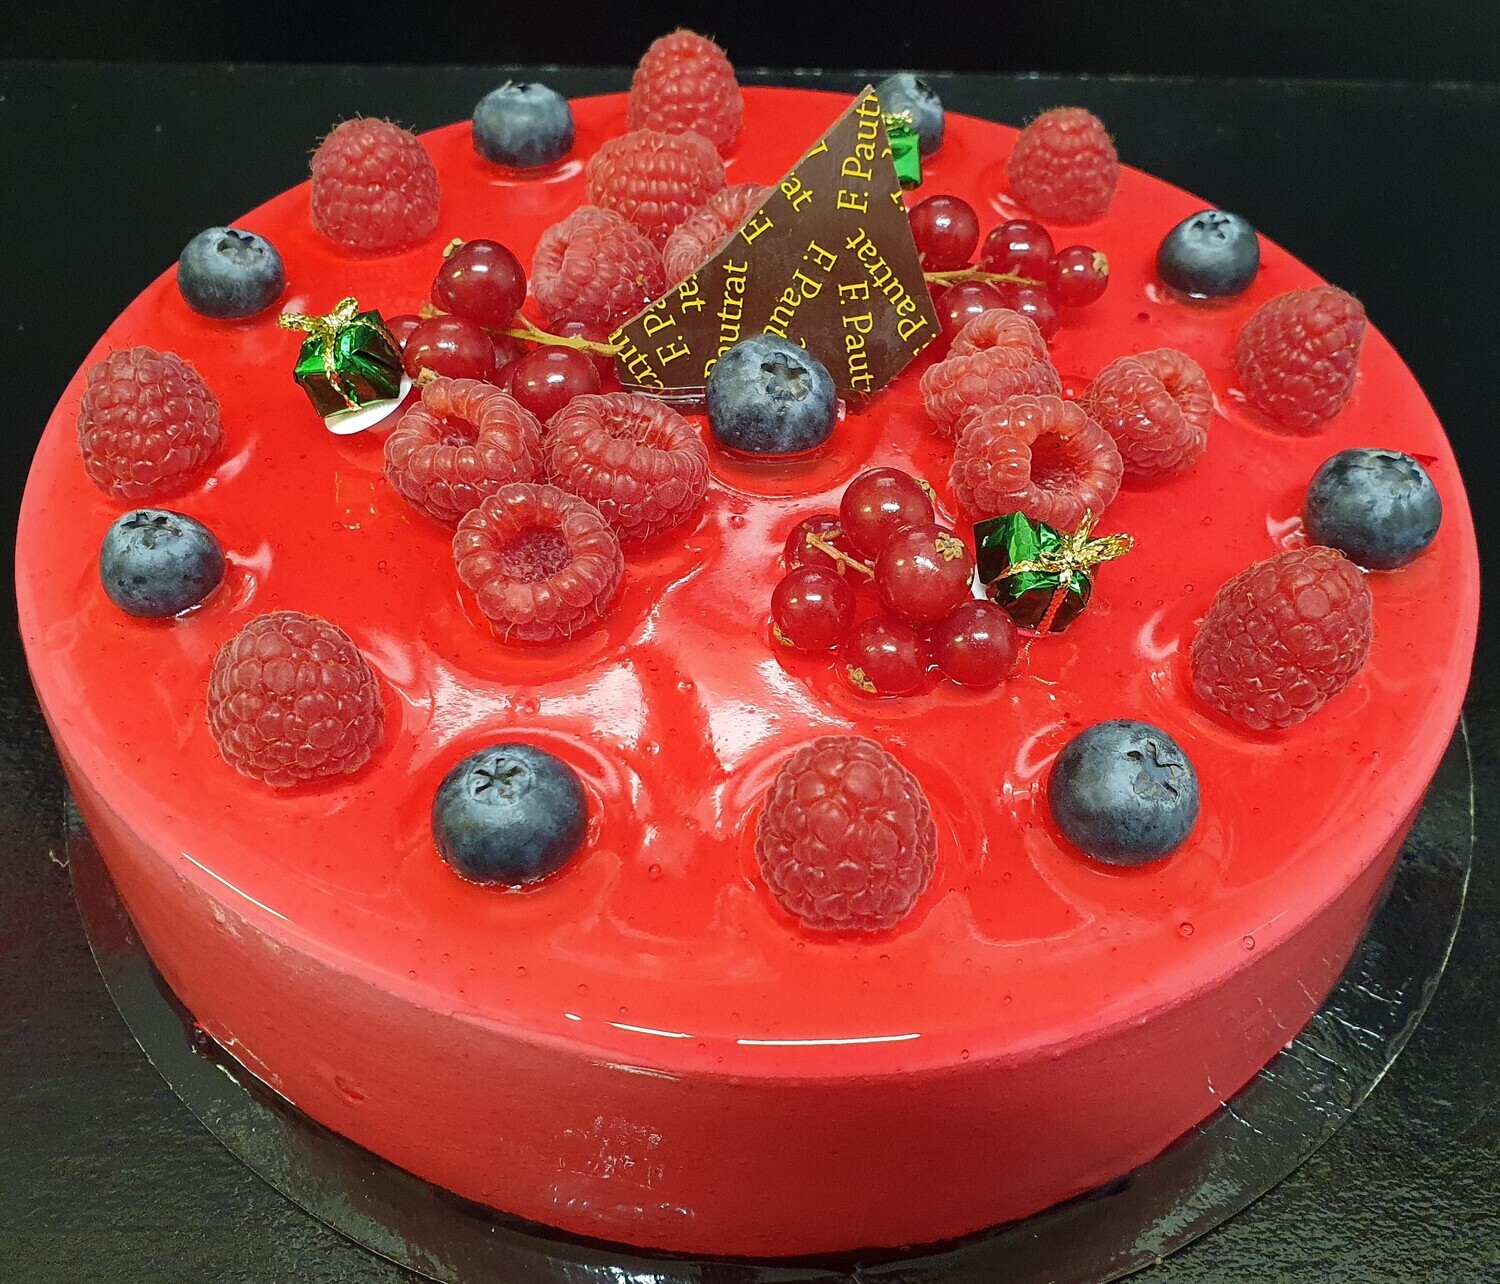 DELICE FRAMBOISE FRUITS ROUGES 4 personnes